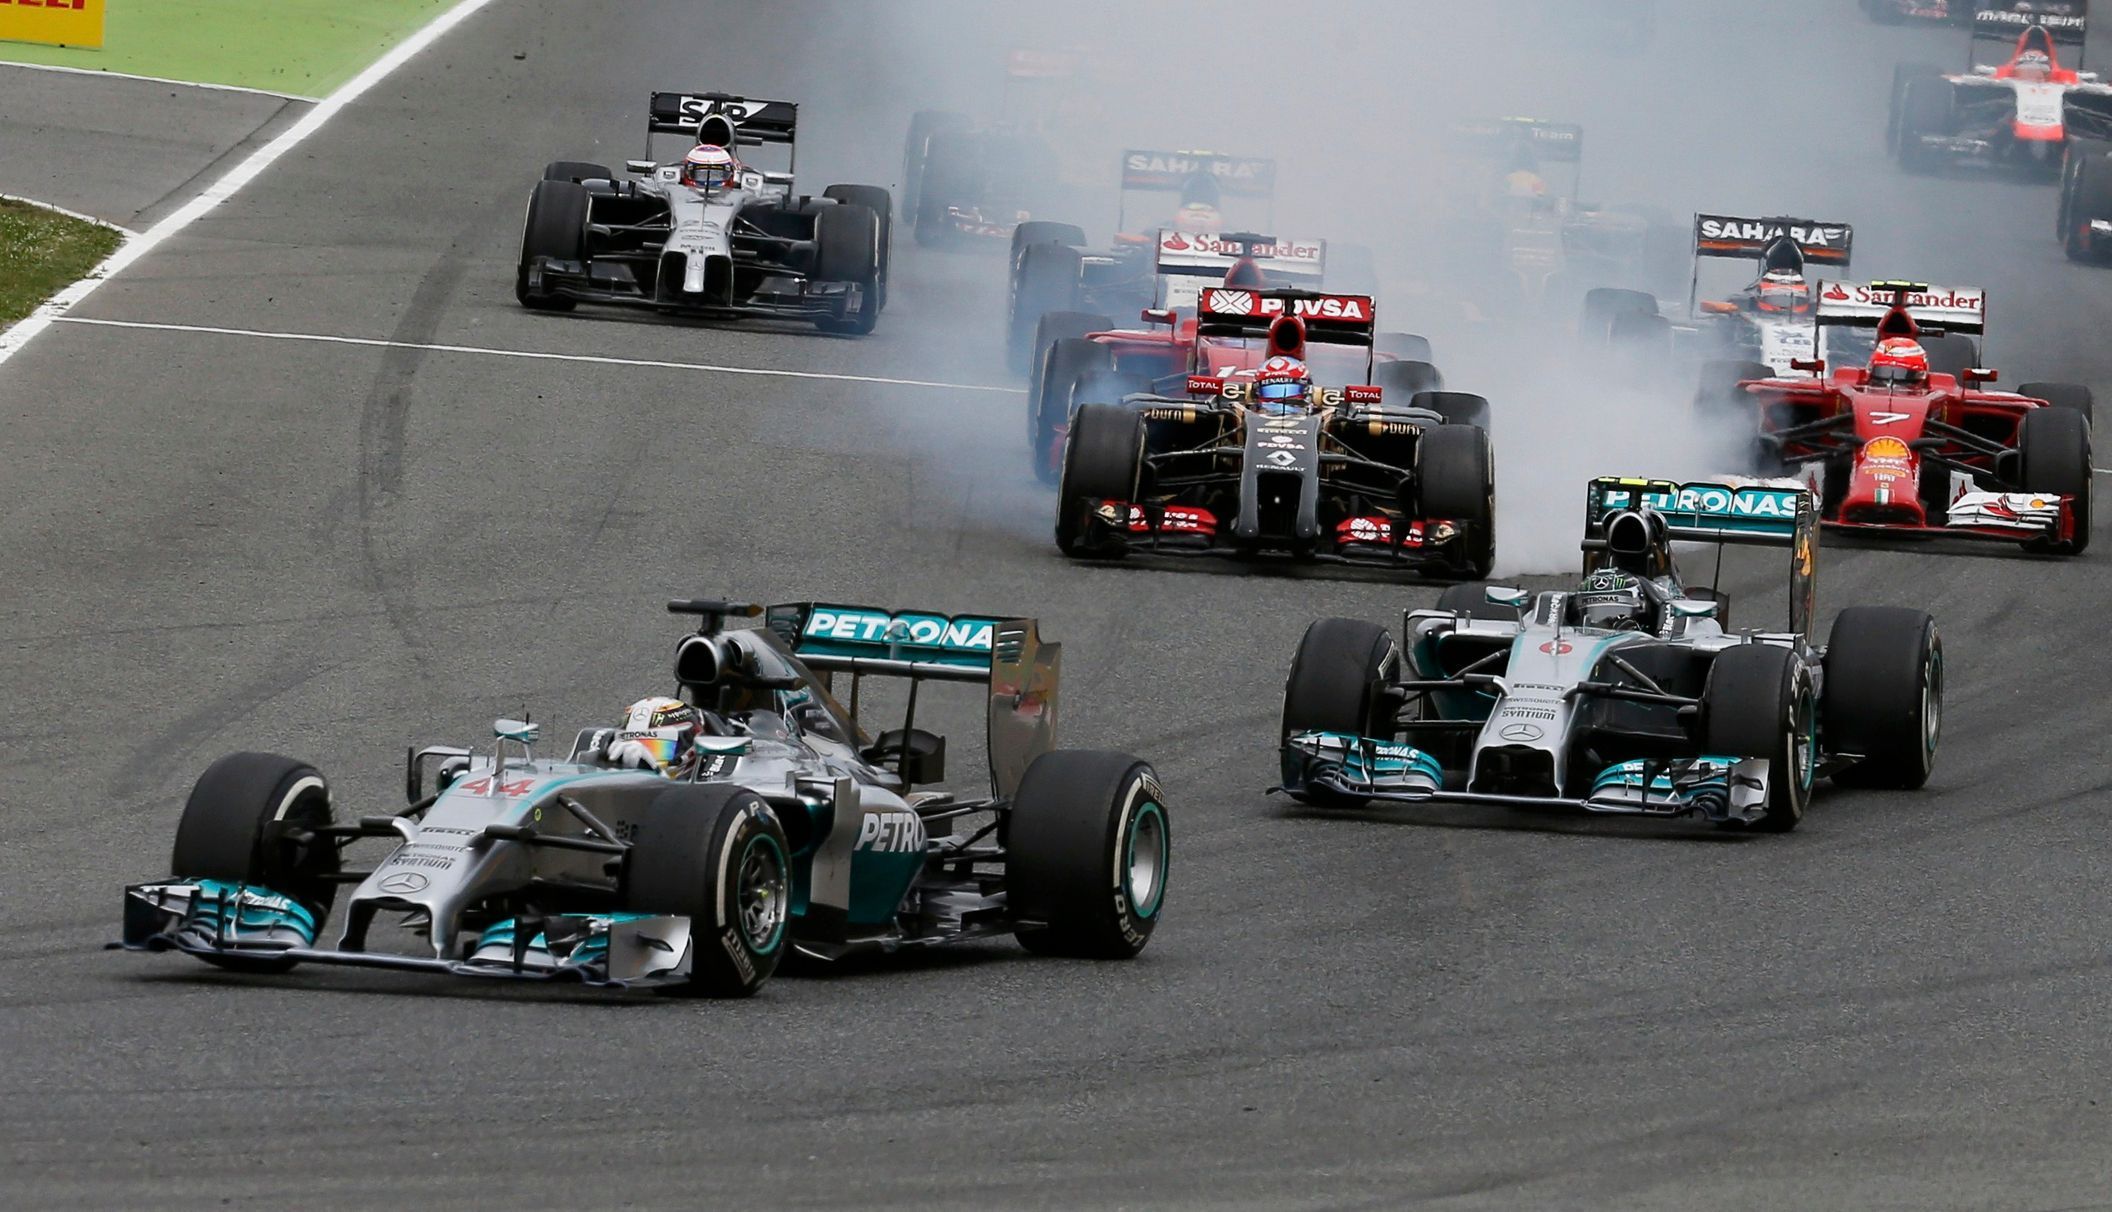 Mercedes Formula One driver Hamilton of Britain drives during the Spanish F1 Grand Prix at the Barcelona-Catalunya Circuit in Montmelo